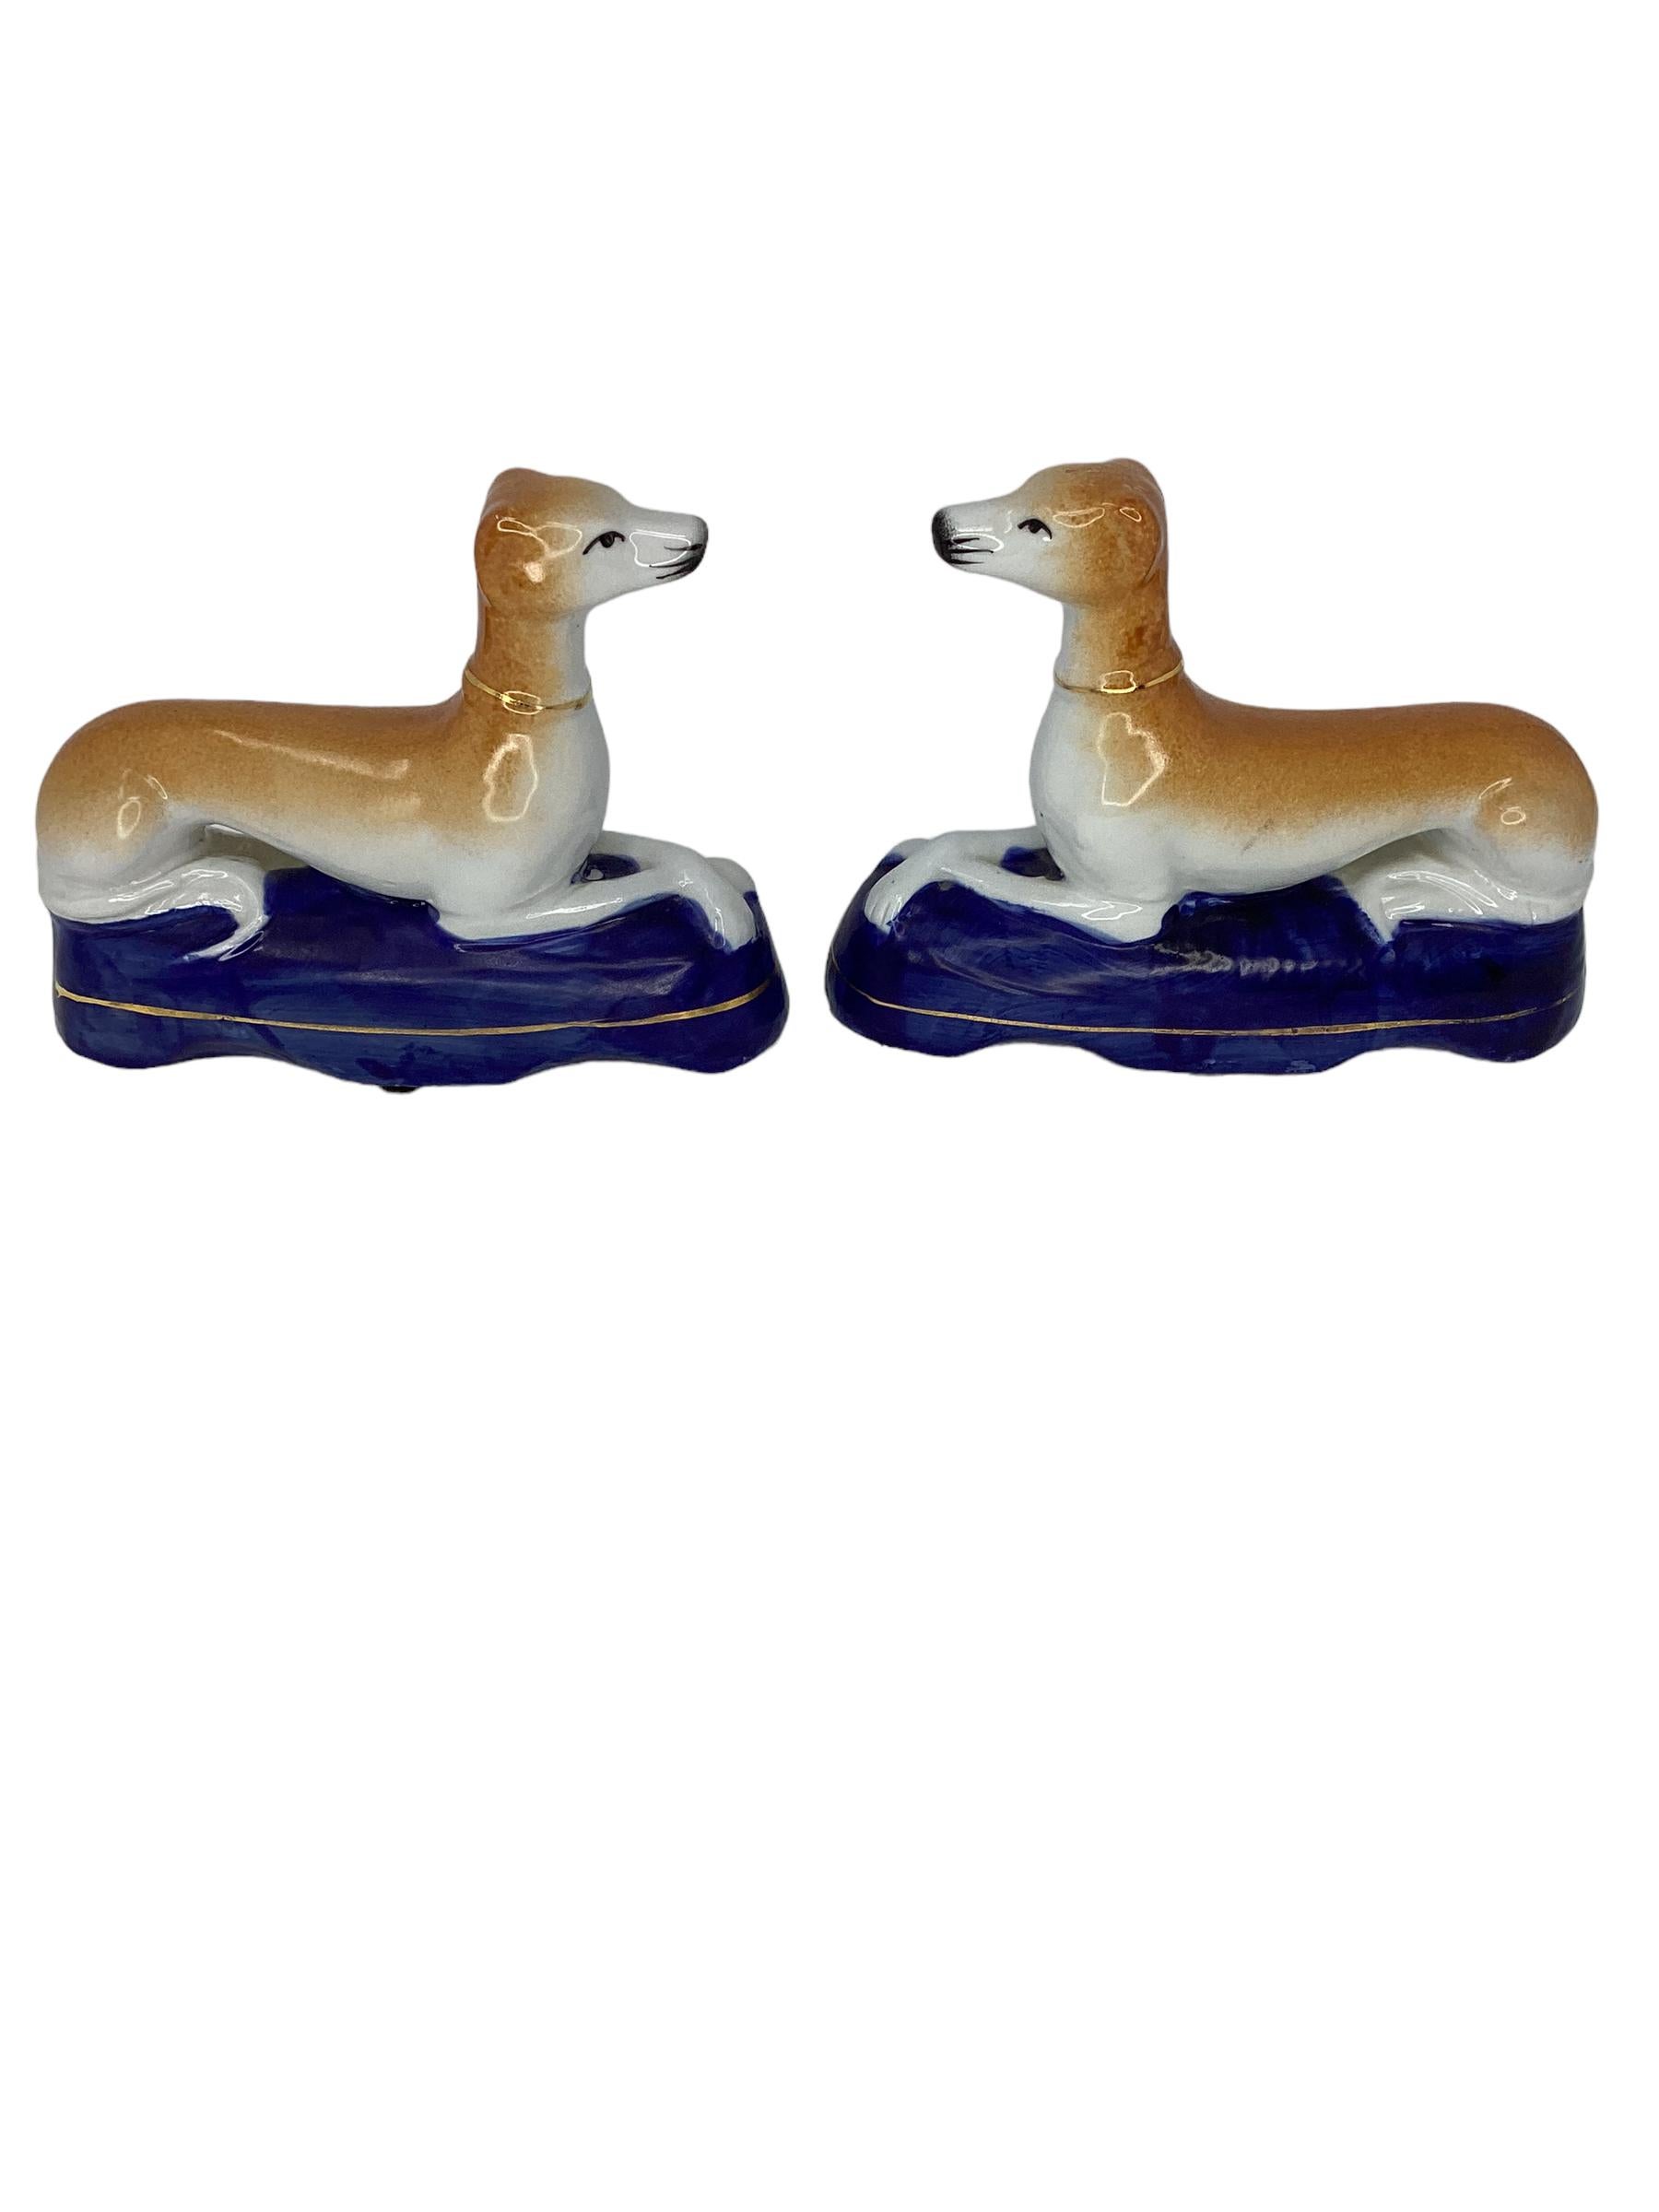 A wonderful Pair of Staffordshire Pottery Greyhound or Whippets in a recumbent pose with crossed legs. Dogs are shown laying on a blue base.